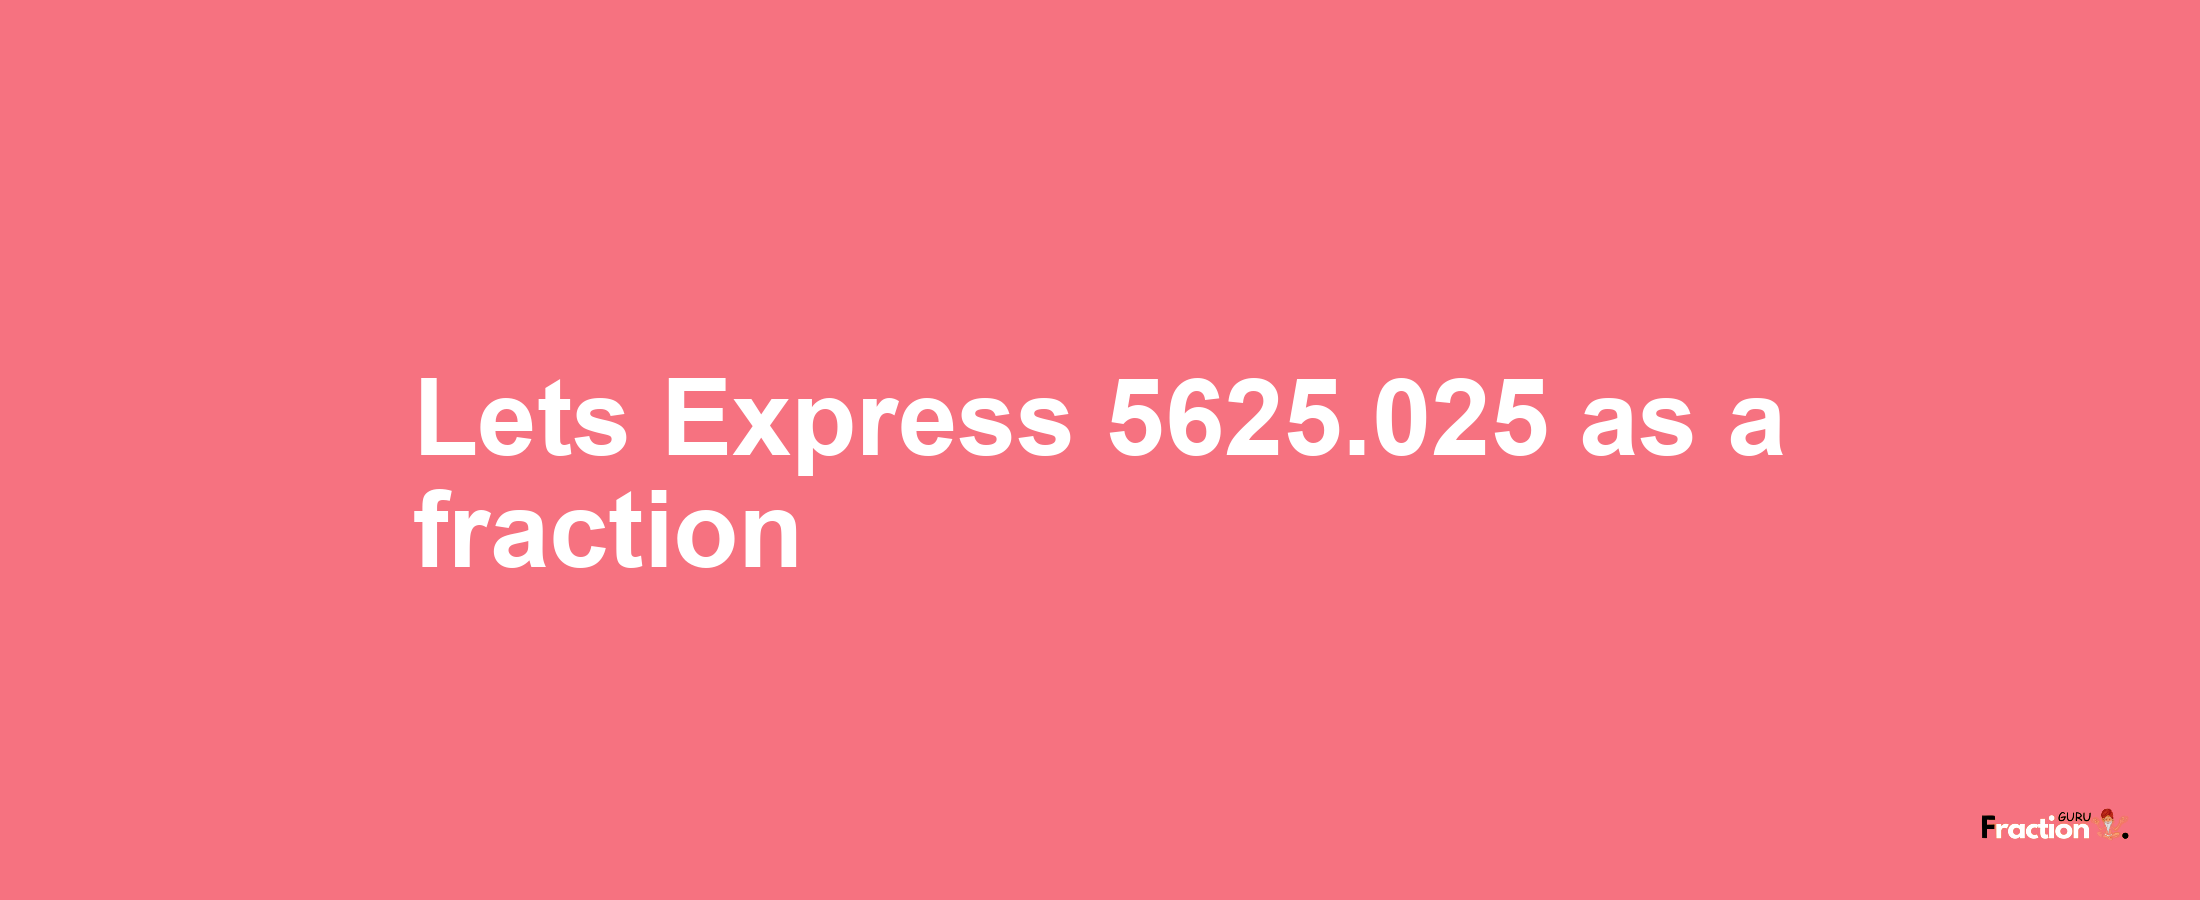 Lets Express 5625.025 as afraction